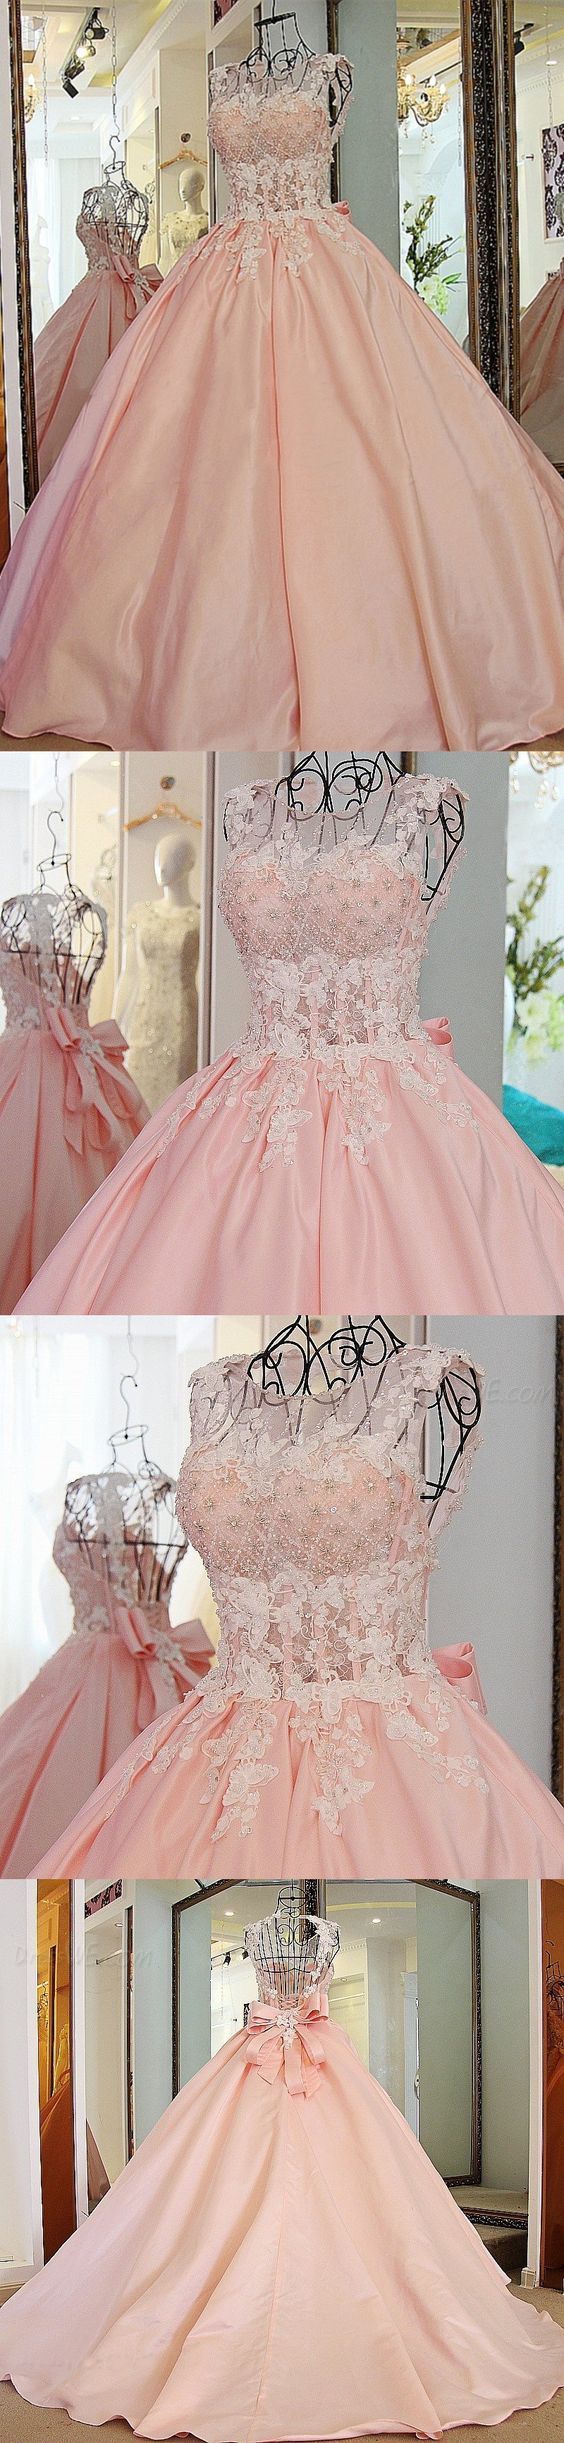 Chic A-line Scoop Pink Lace Prom Dress Floor Length Beading Prom Dress Modest Evening Dresses